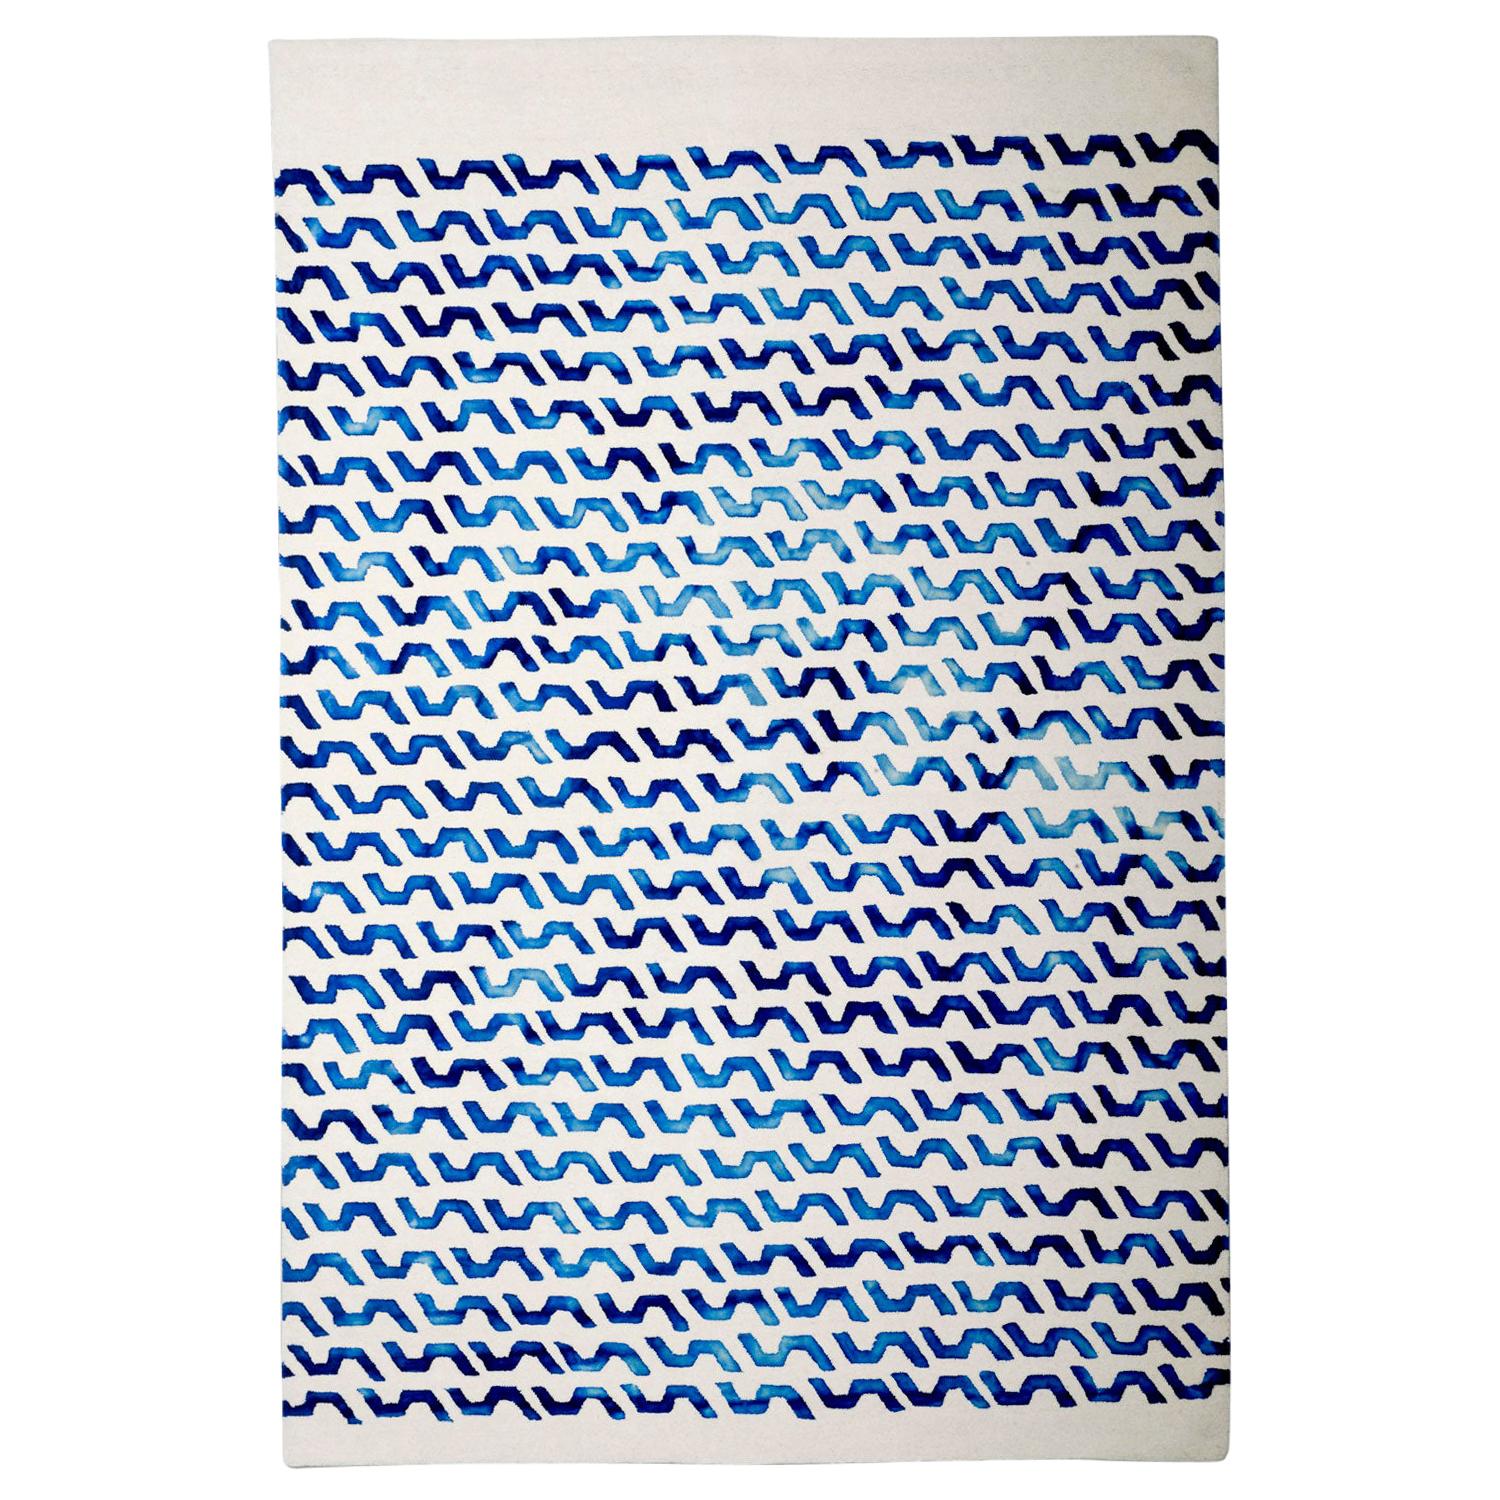 21st Century Patterned New Zealand Wool Rug by Deanna Comellini 200x300 cm